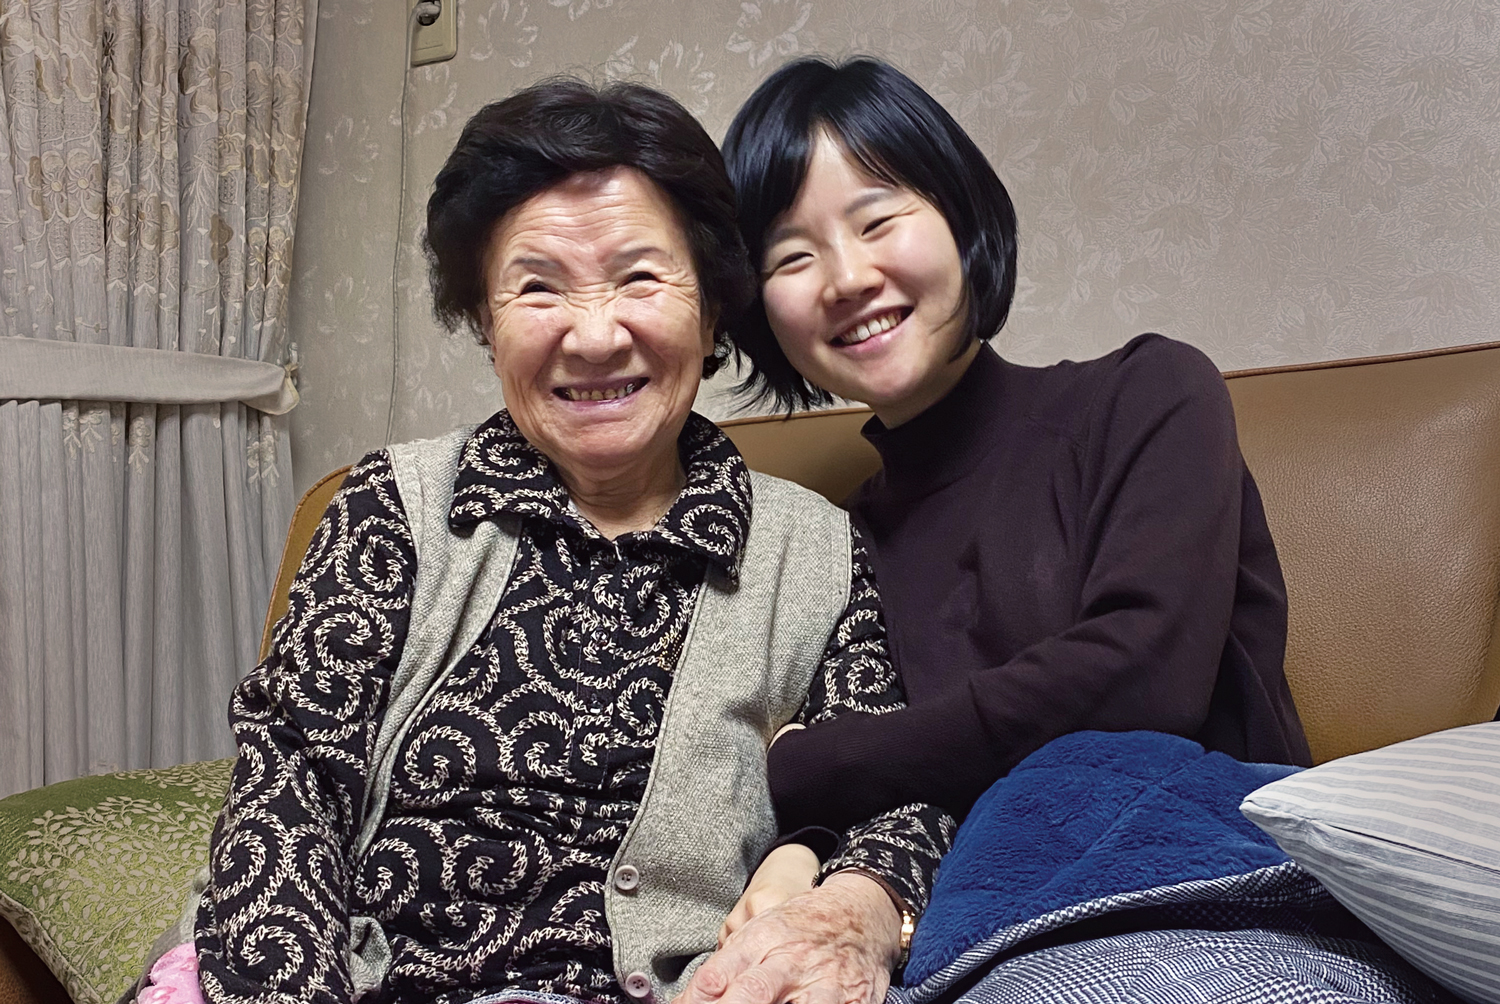 Boyoung Ahn visits her 90-year-old grandmother, Gyujeong Song, in Suwon, South Korea in January 2023.